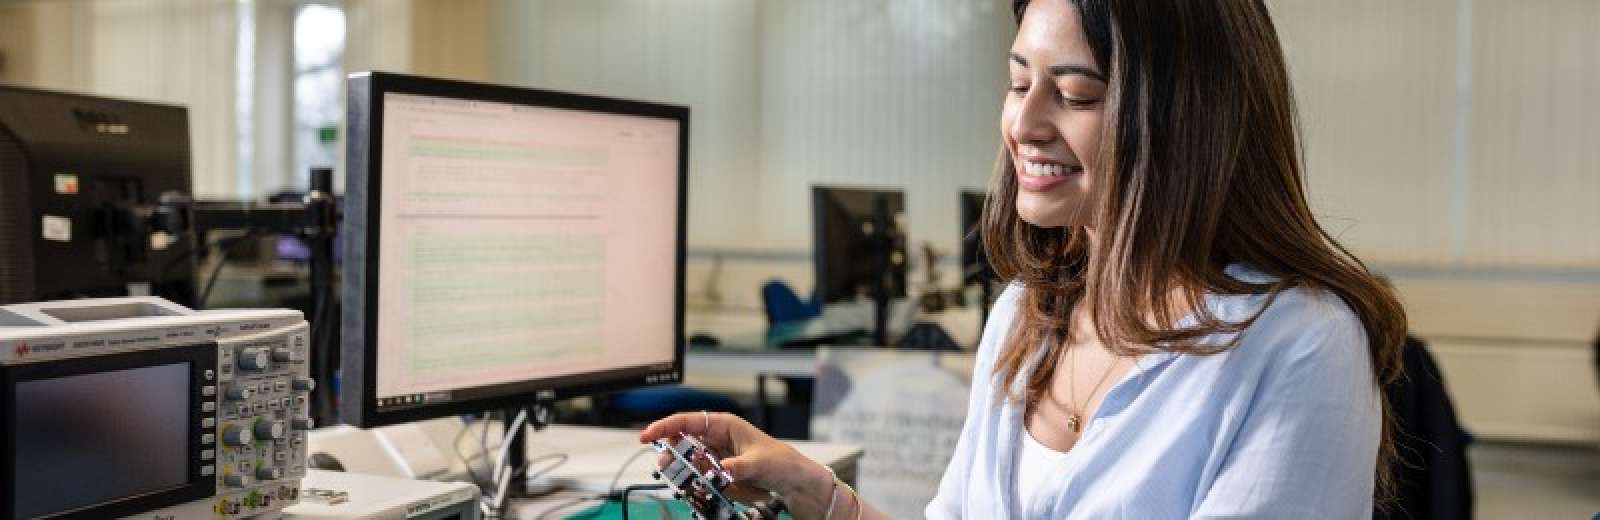 female student working in electronics lab